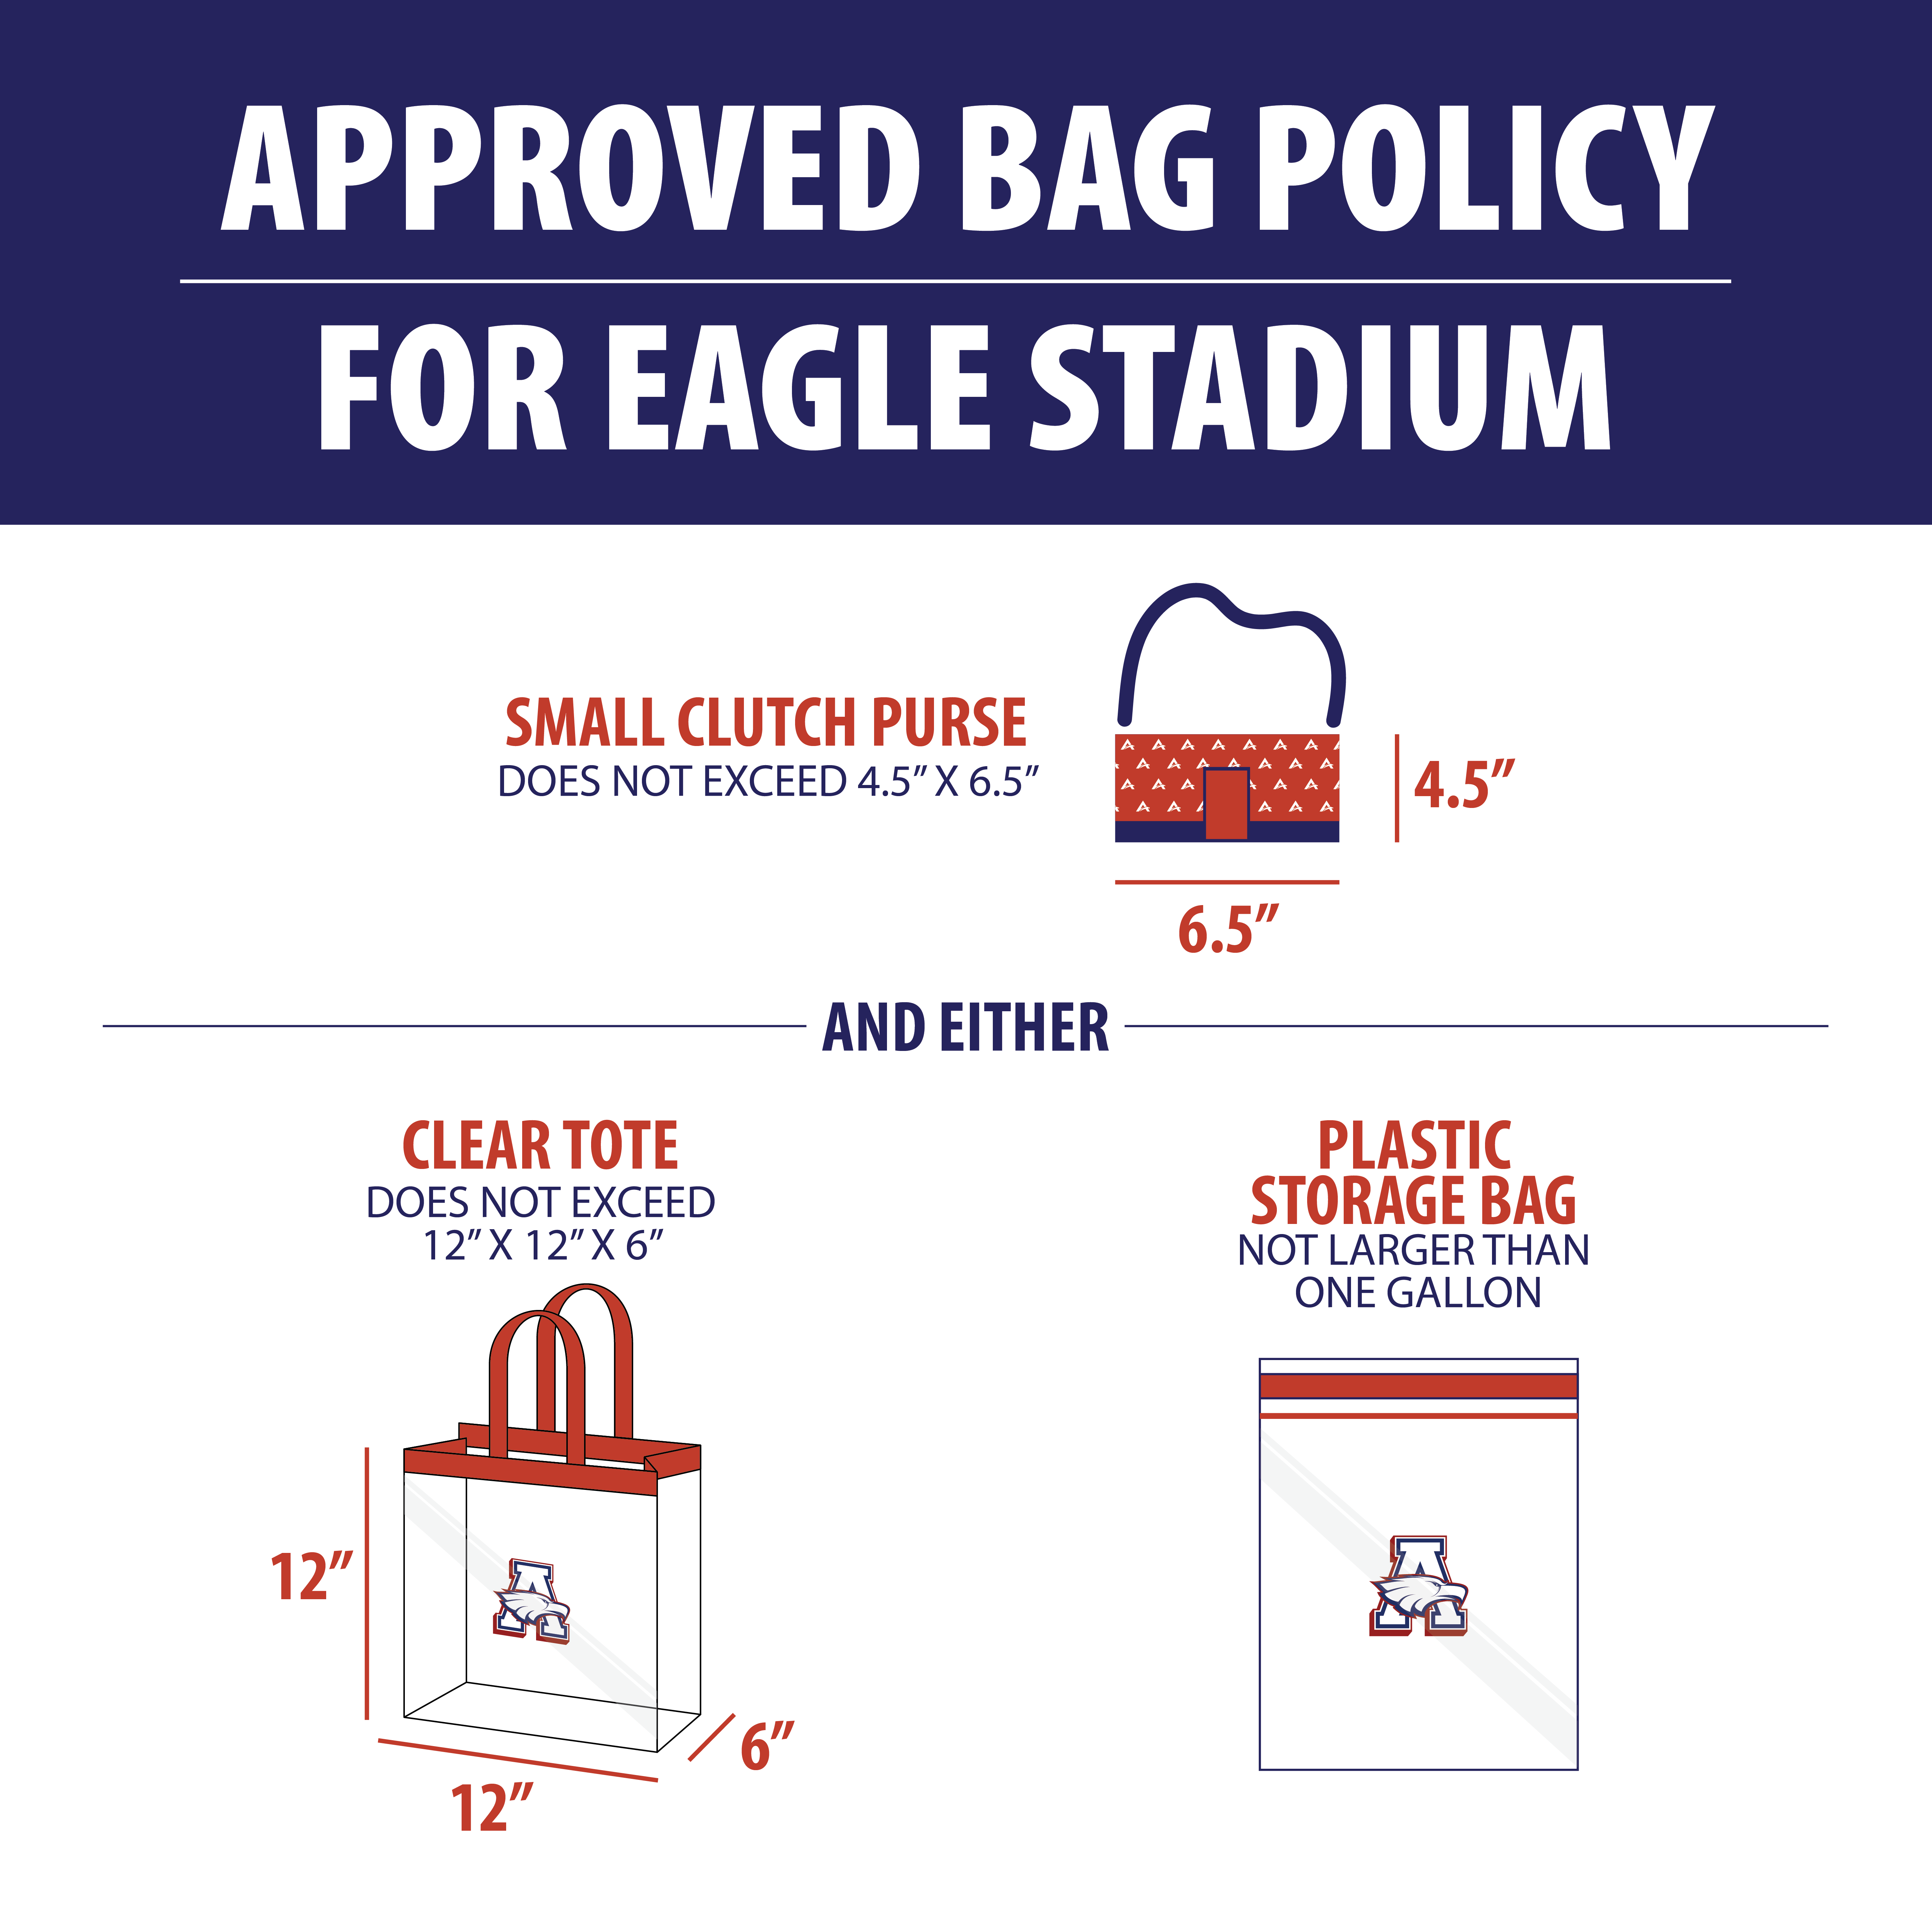 clear bag policy